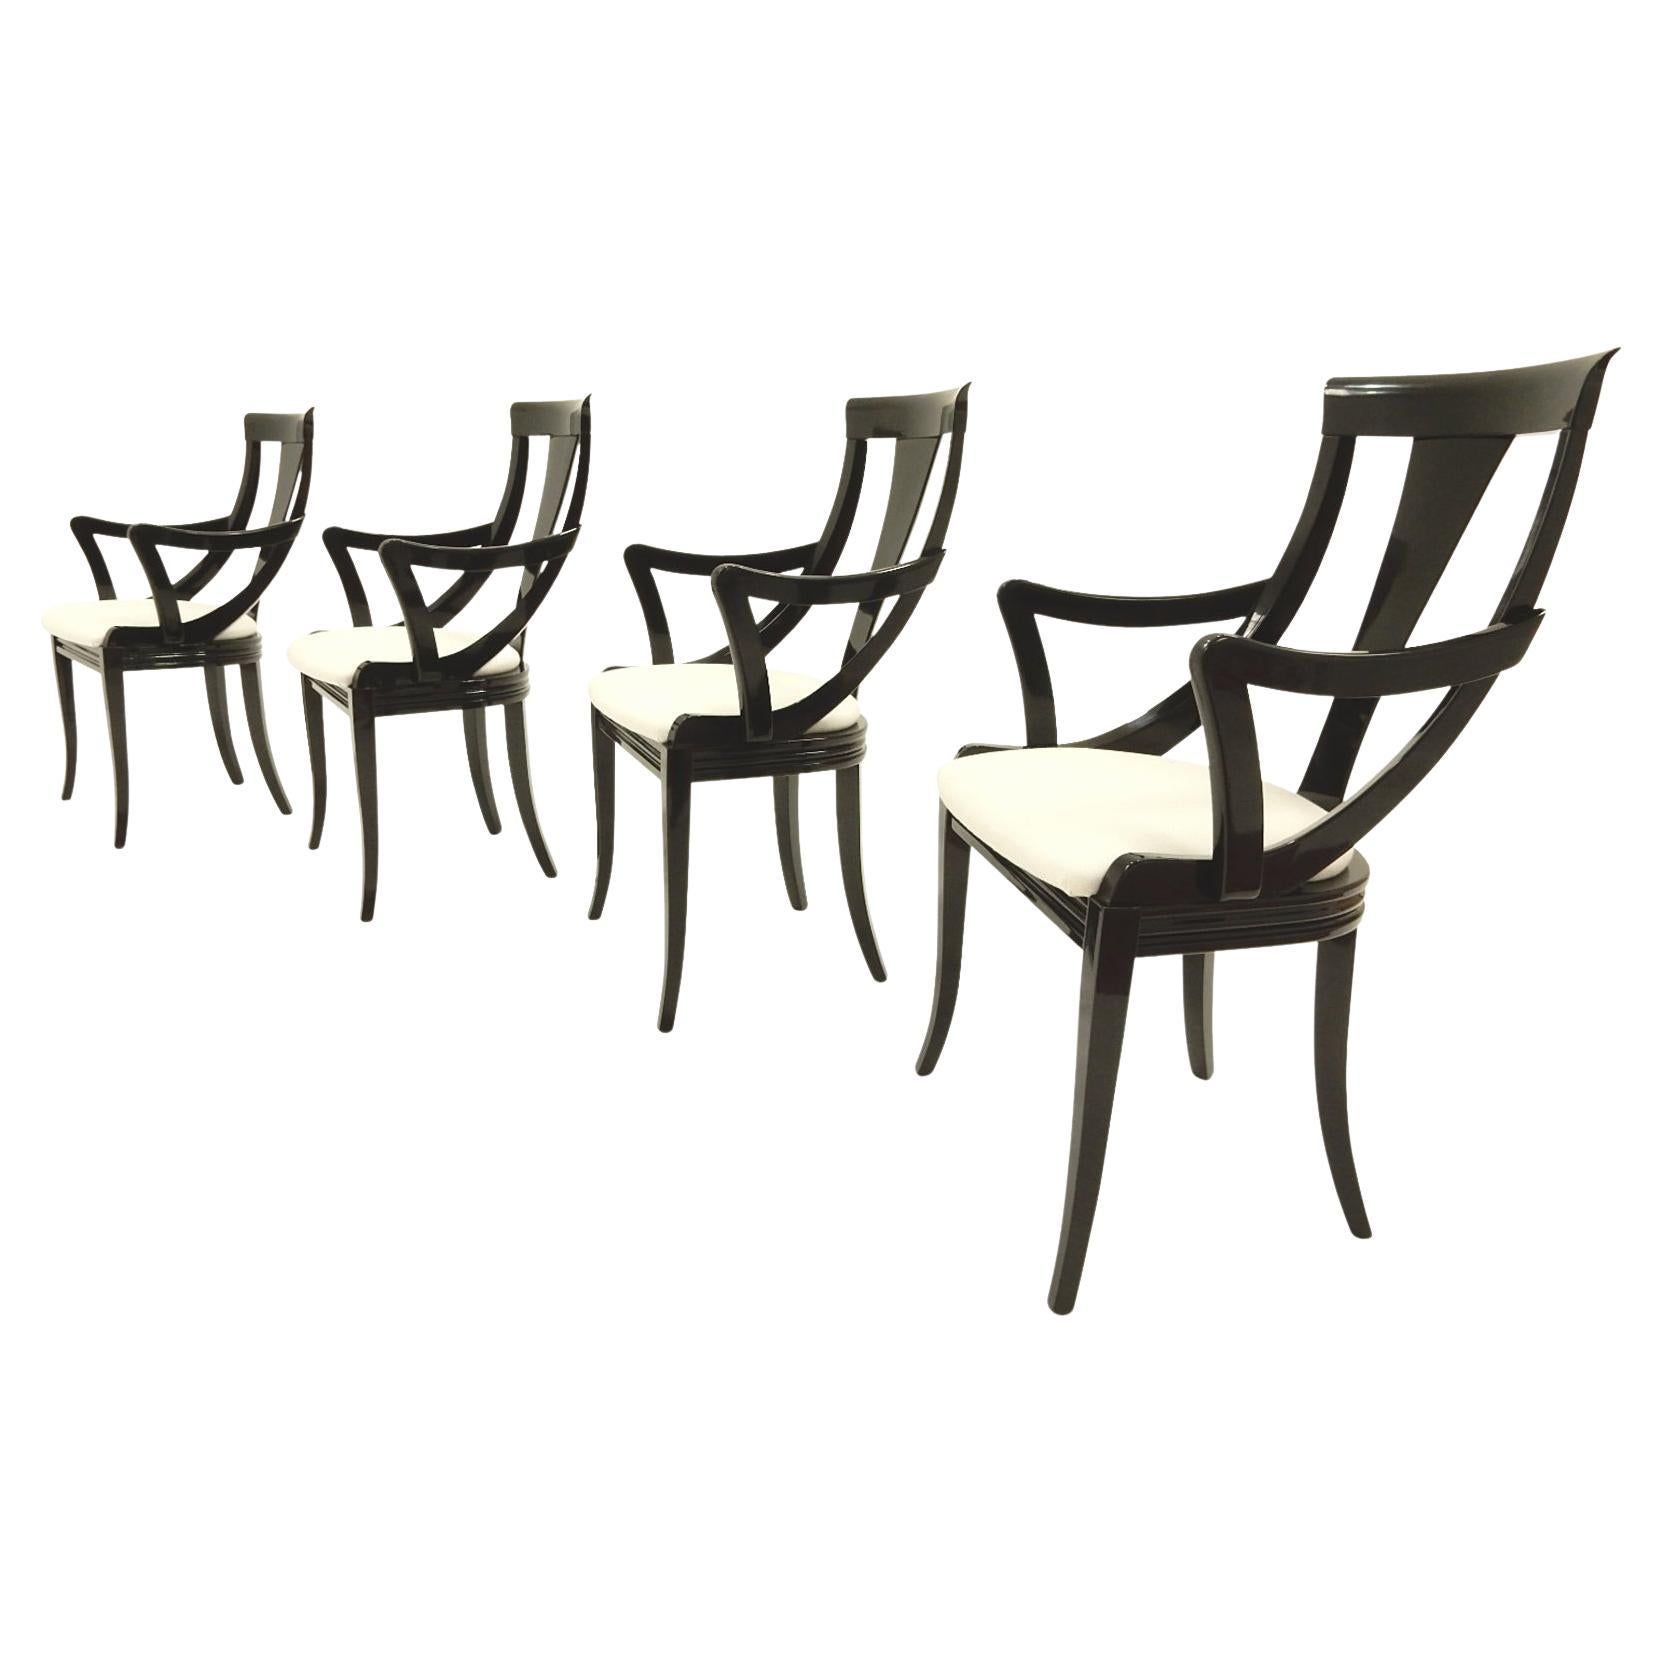 Sculptural Black Lacquer Dining Chairs by Pietro Costantini, Made in Italy